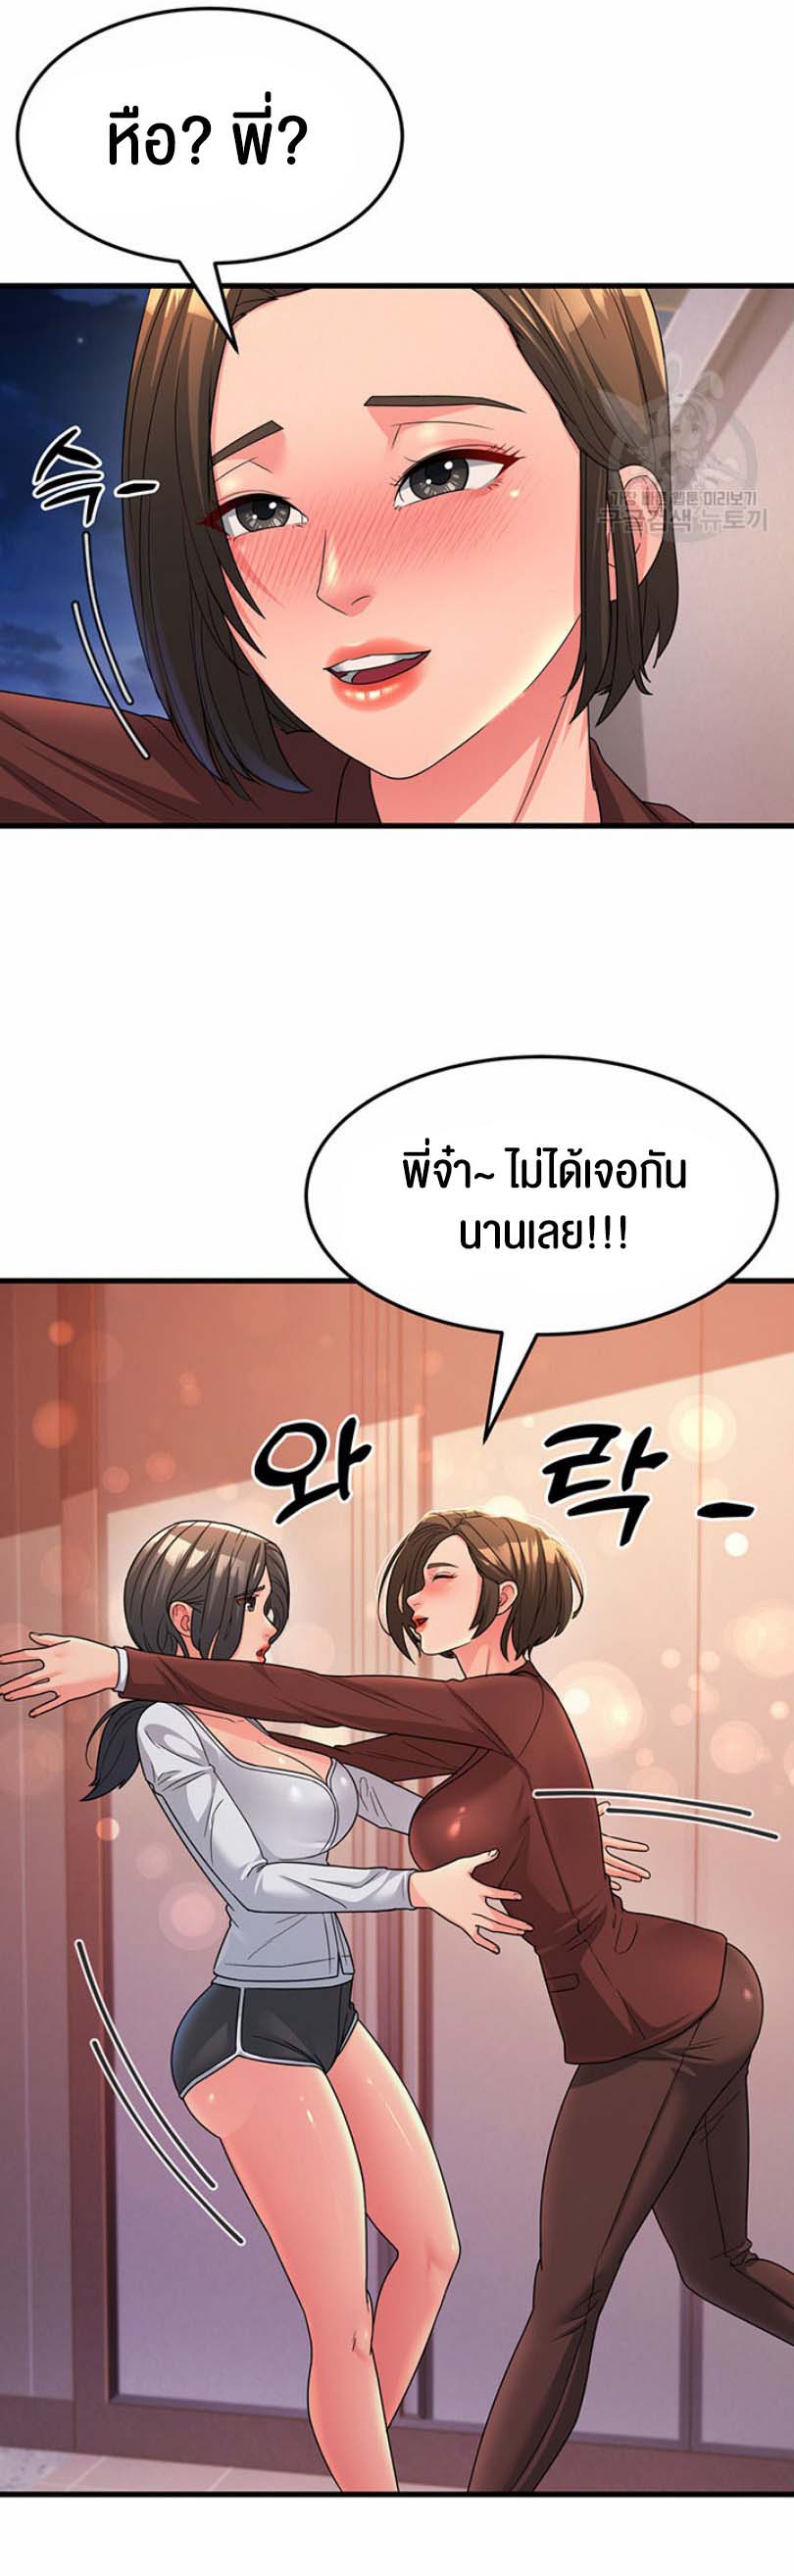 à¸­à¹ˆà¸²à¸™à¹‚à¸”à¸ˆà¸´à¸™ à¹€à¸£à¸·à¹ˆà¸­à¸‡ Mother in Law Bends To My Will 9 41